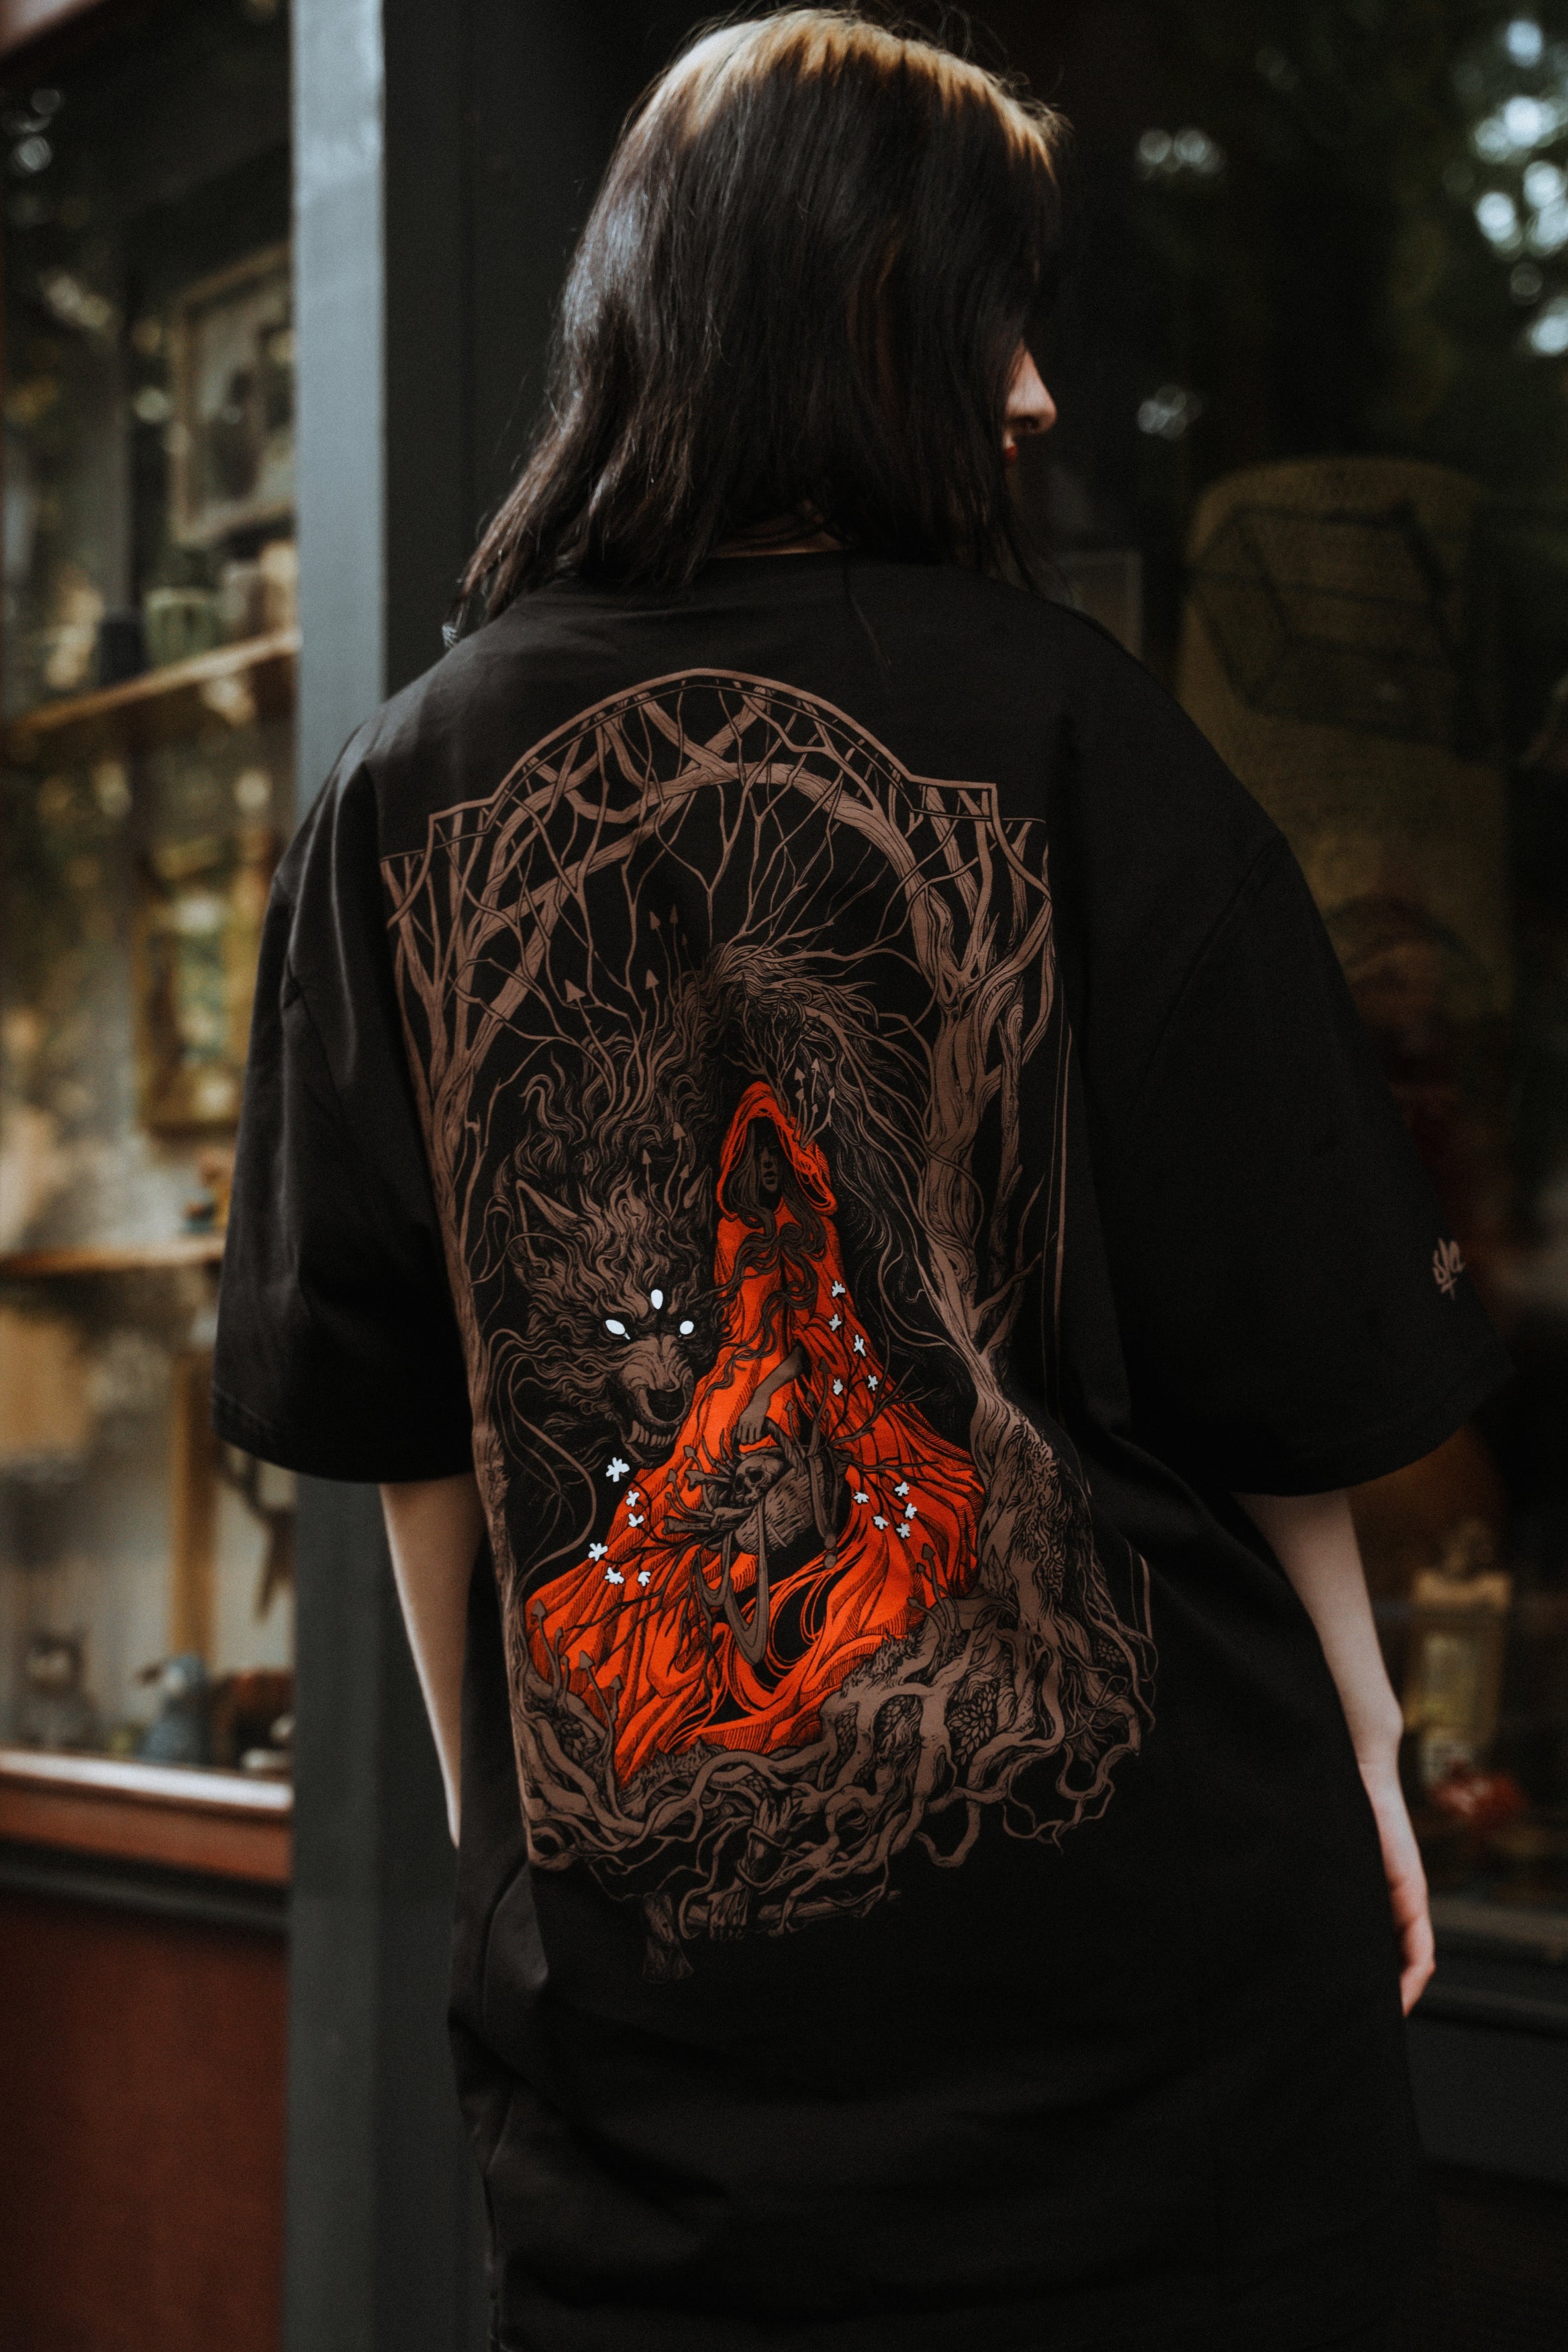 In The Woods - T-Shirt